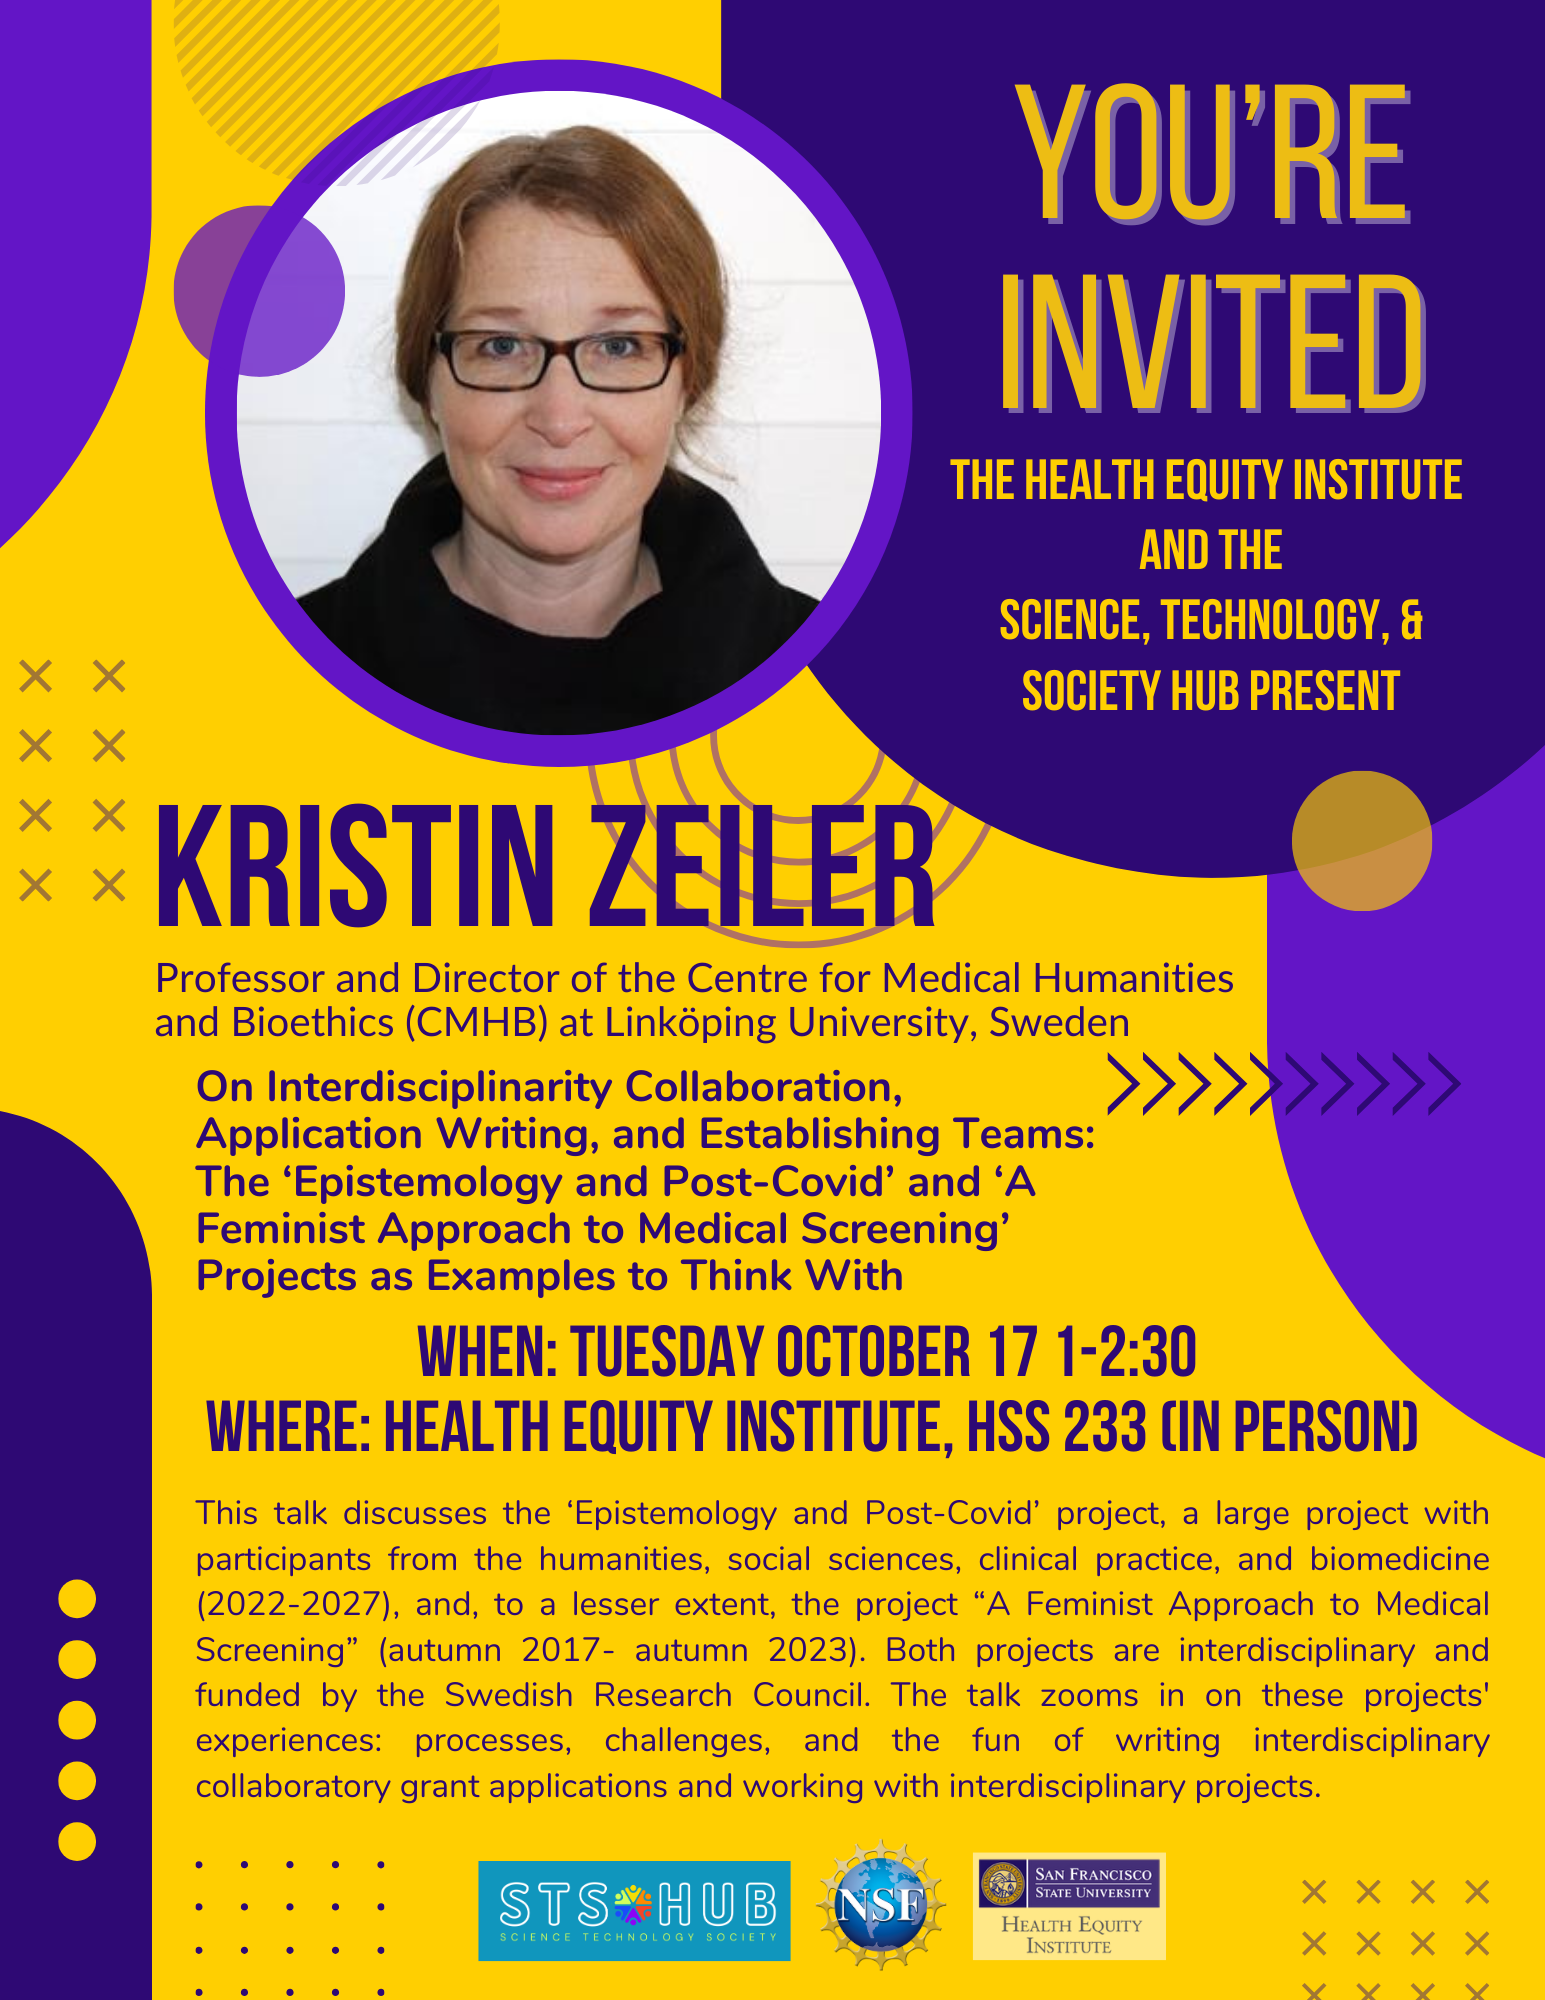 A purple and gold flyer with a headshot of a white woman with auburn hair pulled back, glasses, wearing a black sweater. The text gives information about the speaker event.